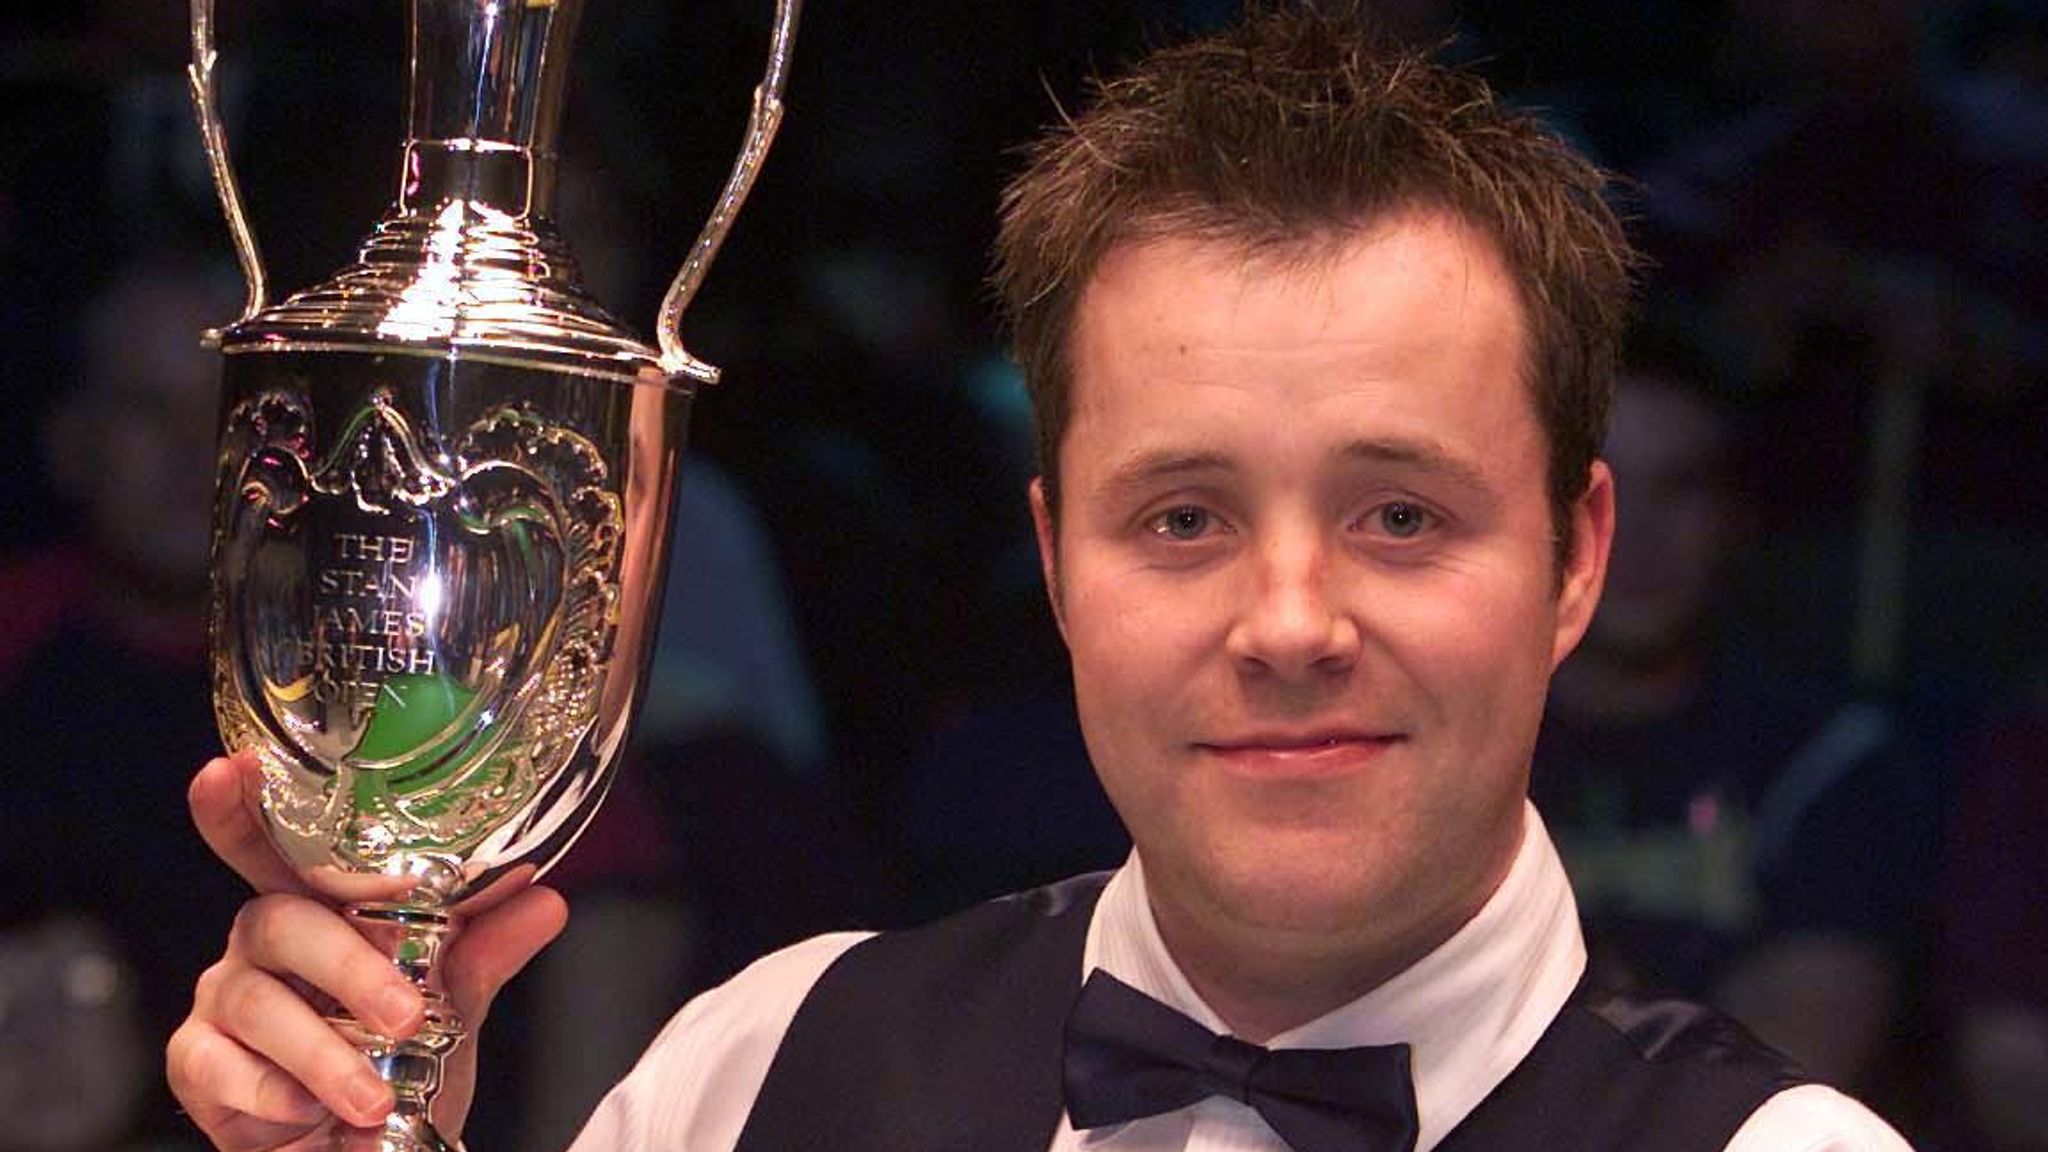 The British Open returns to the snooker calendar for the first time in 17 years Snooker News Sky Sports